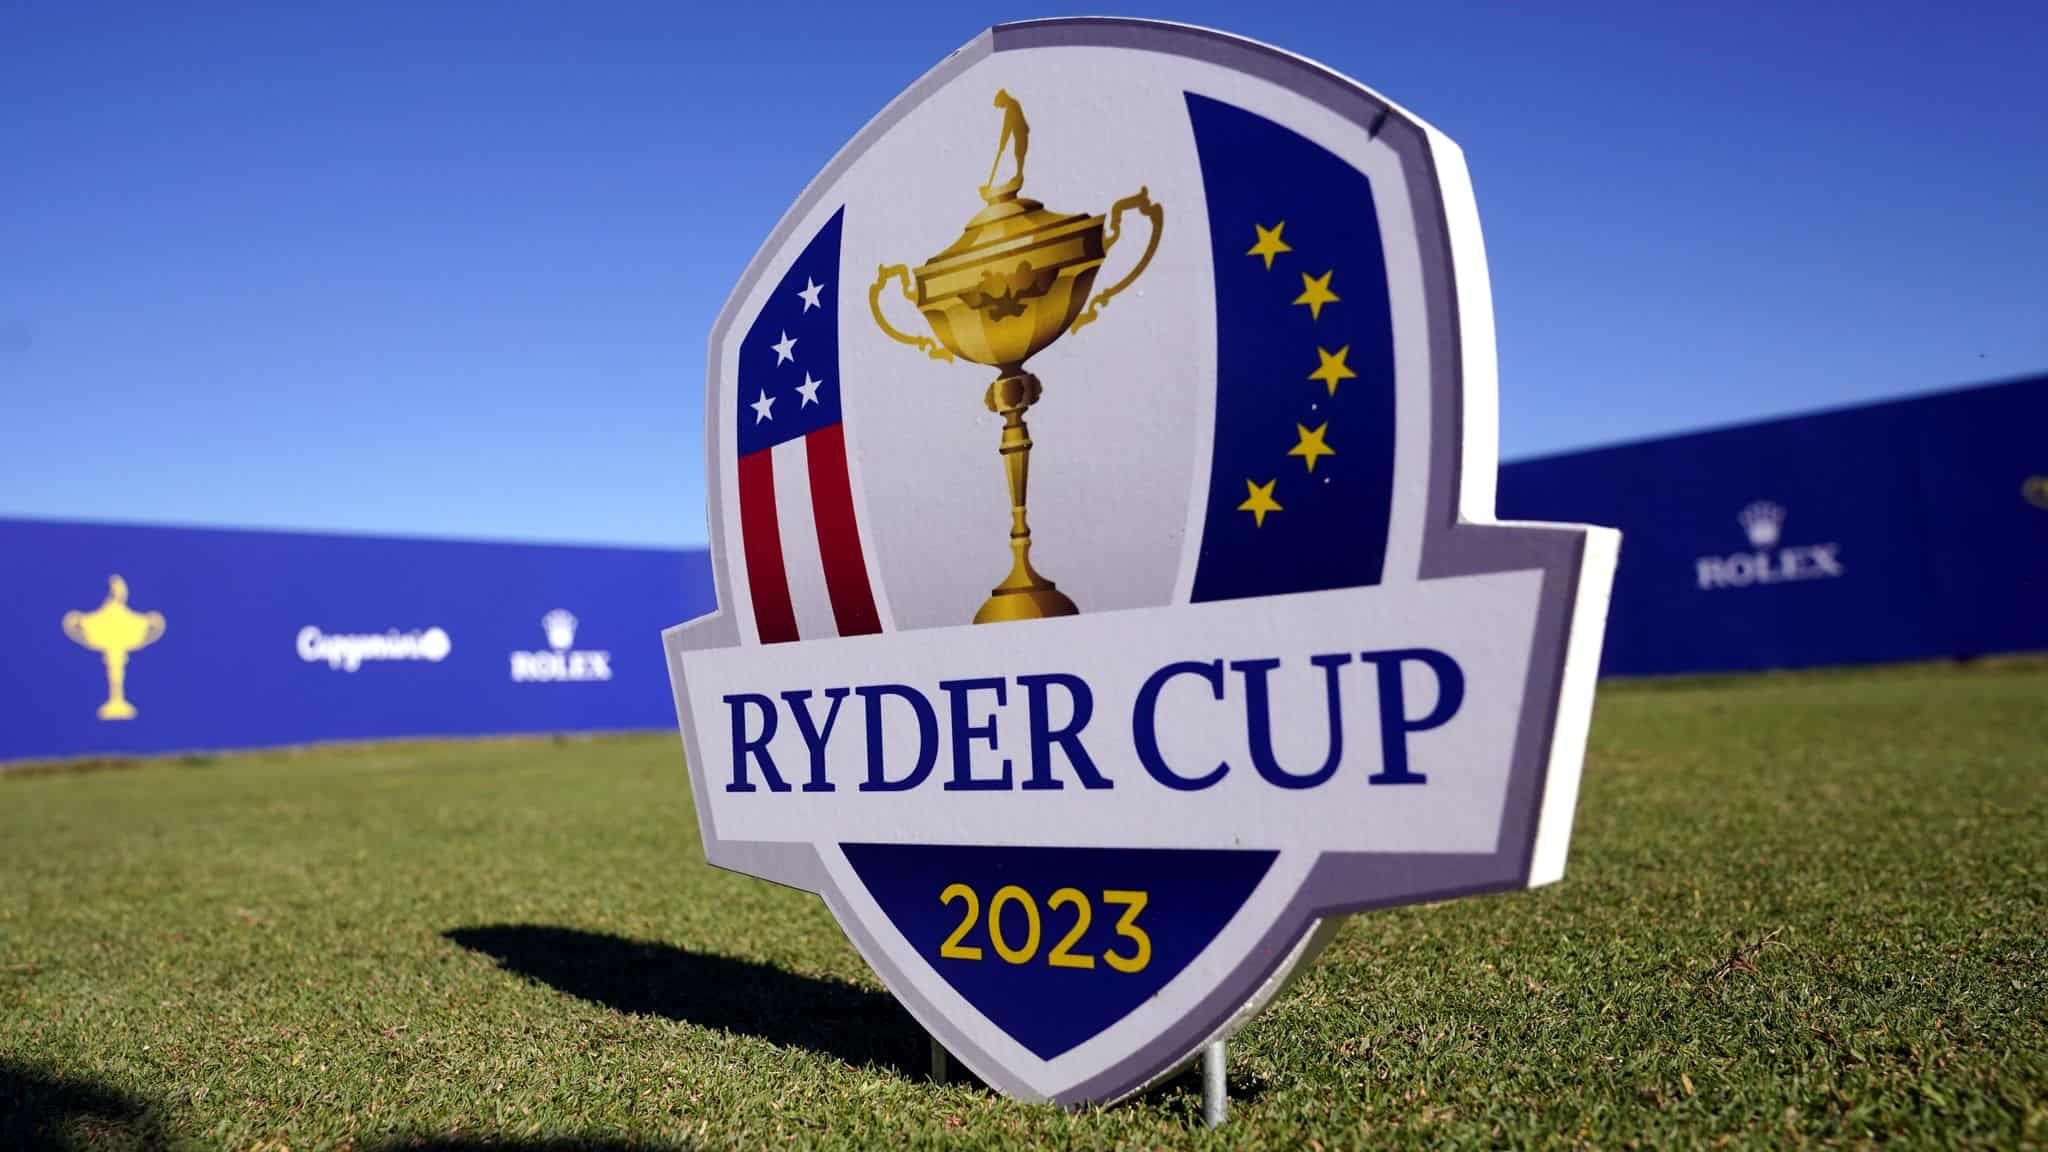 Ryder Cup Predictions & Preview 2023